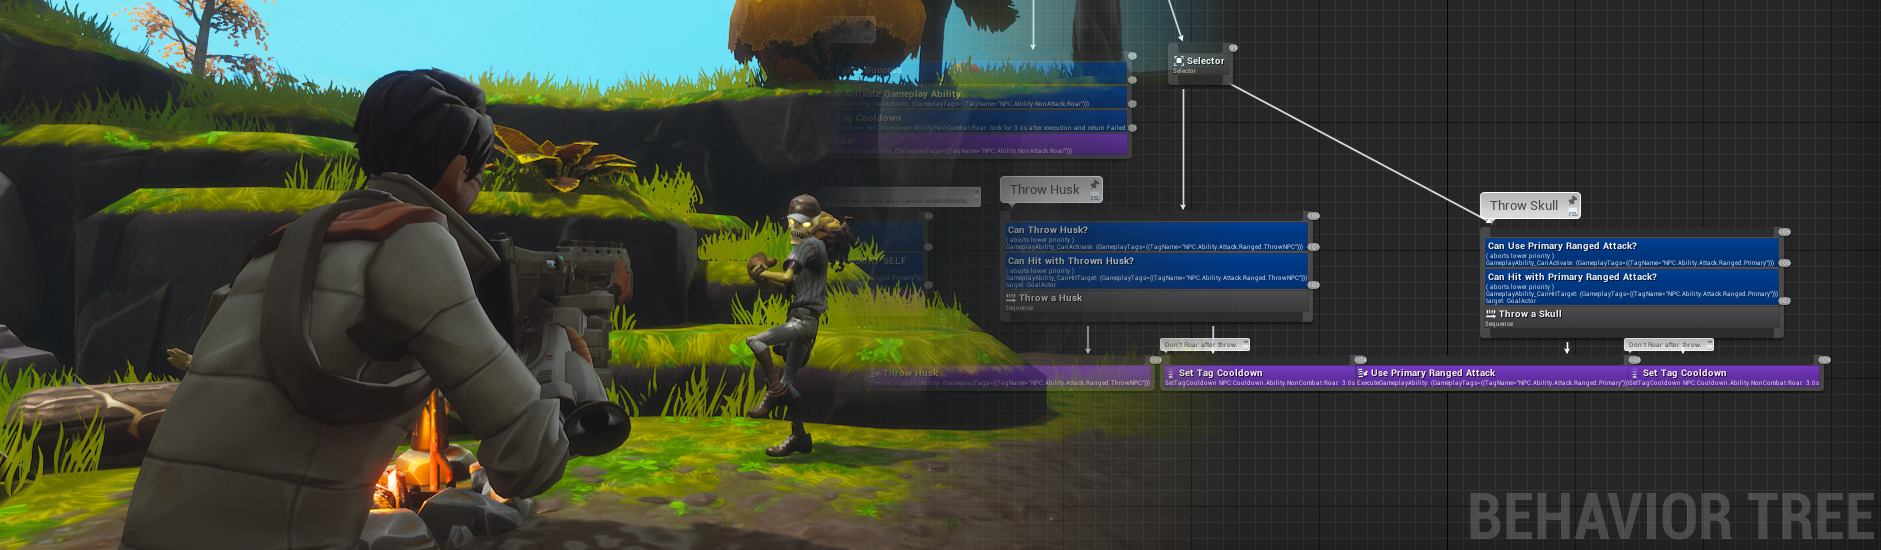 Learn how to use Unreal Engine and make your own video games